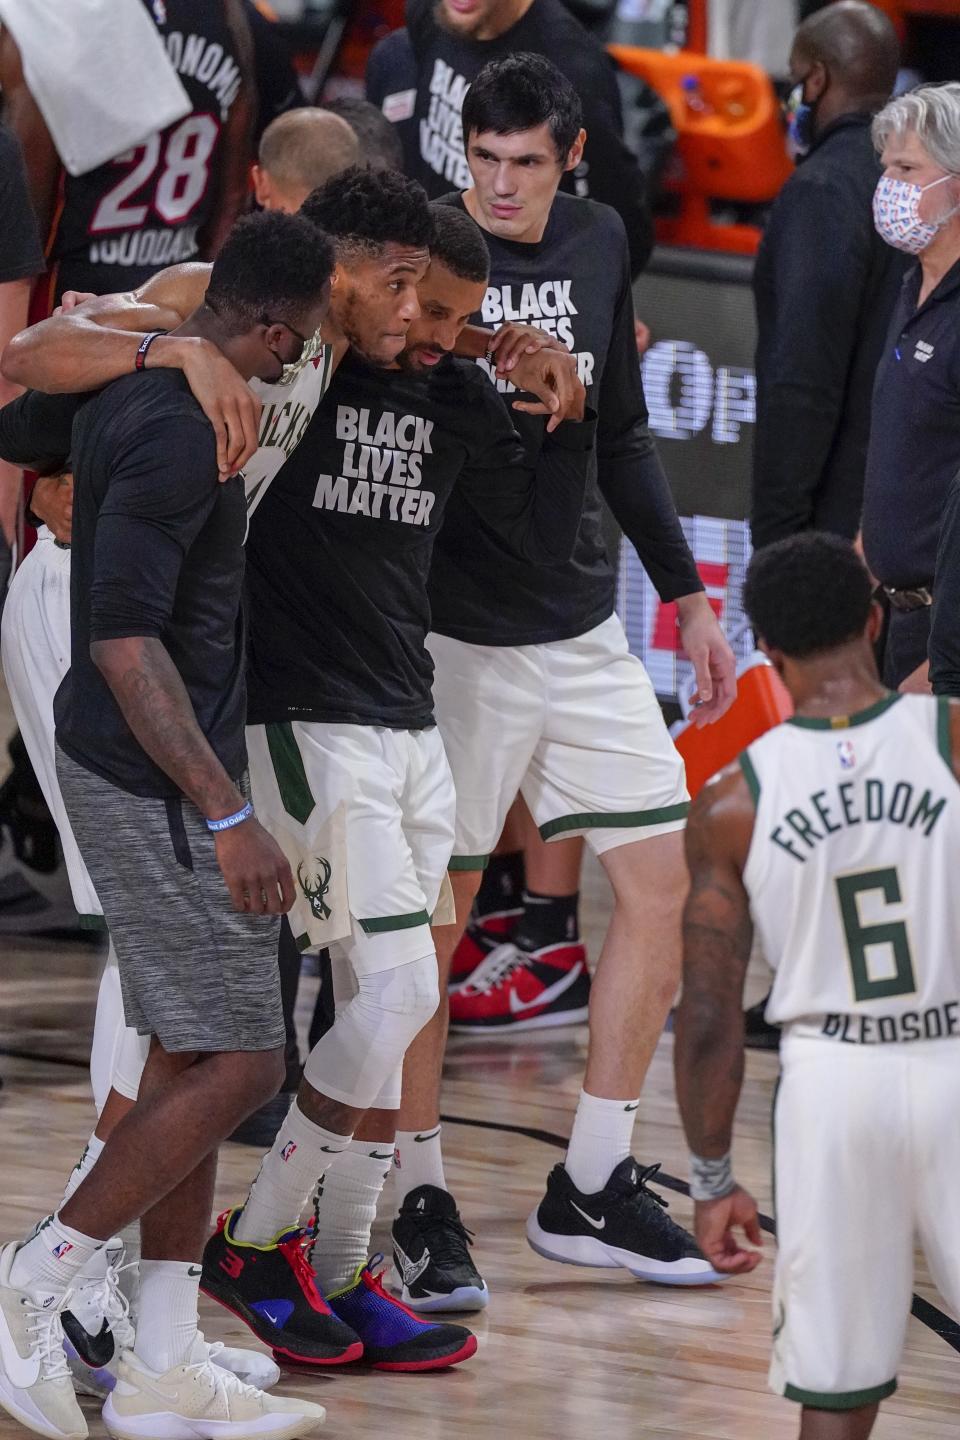 Milwaukee Bucks' Giannis Antetokounmpo is helped off the court after hurting his ankle during the first half of an NBA conference semifinal playoff basketball game against the Miami Heat Sunday, Sept. 6, 2020, in Lake Buena Vista, Fla. (AP Photo/Mark J. Terrill)